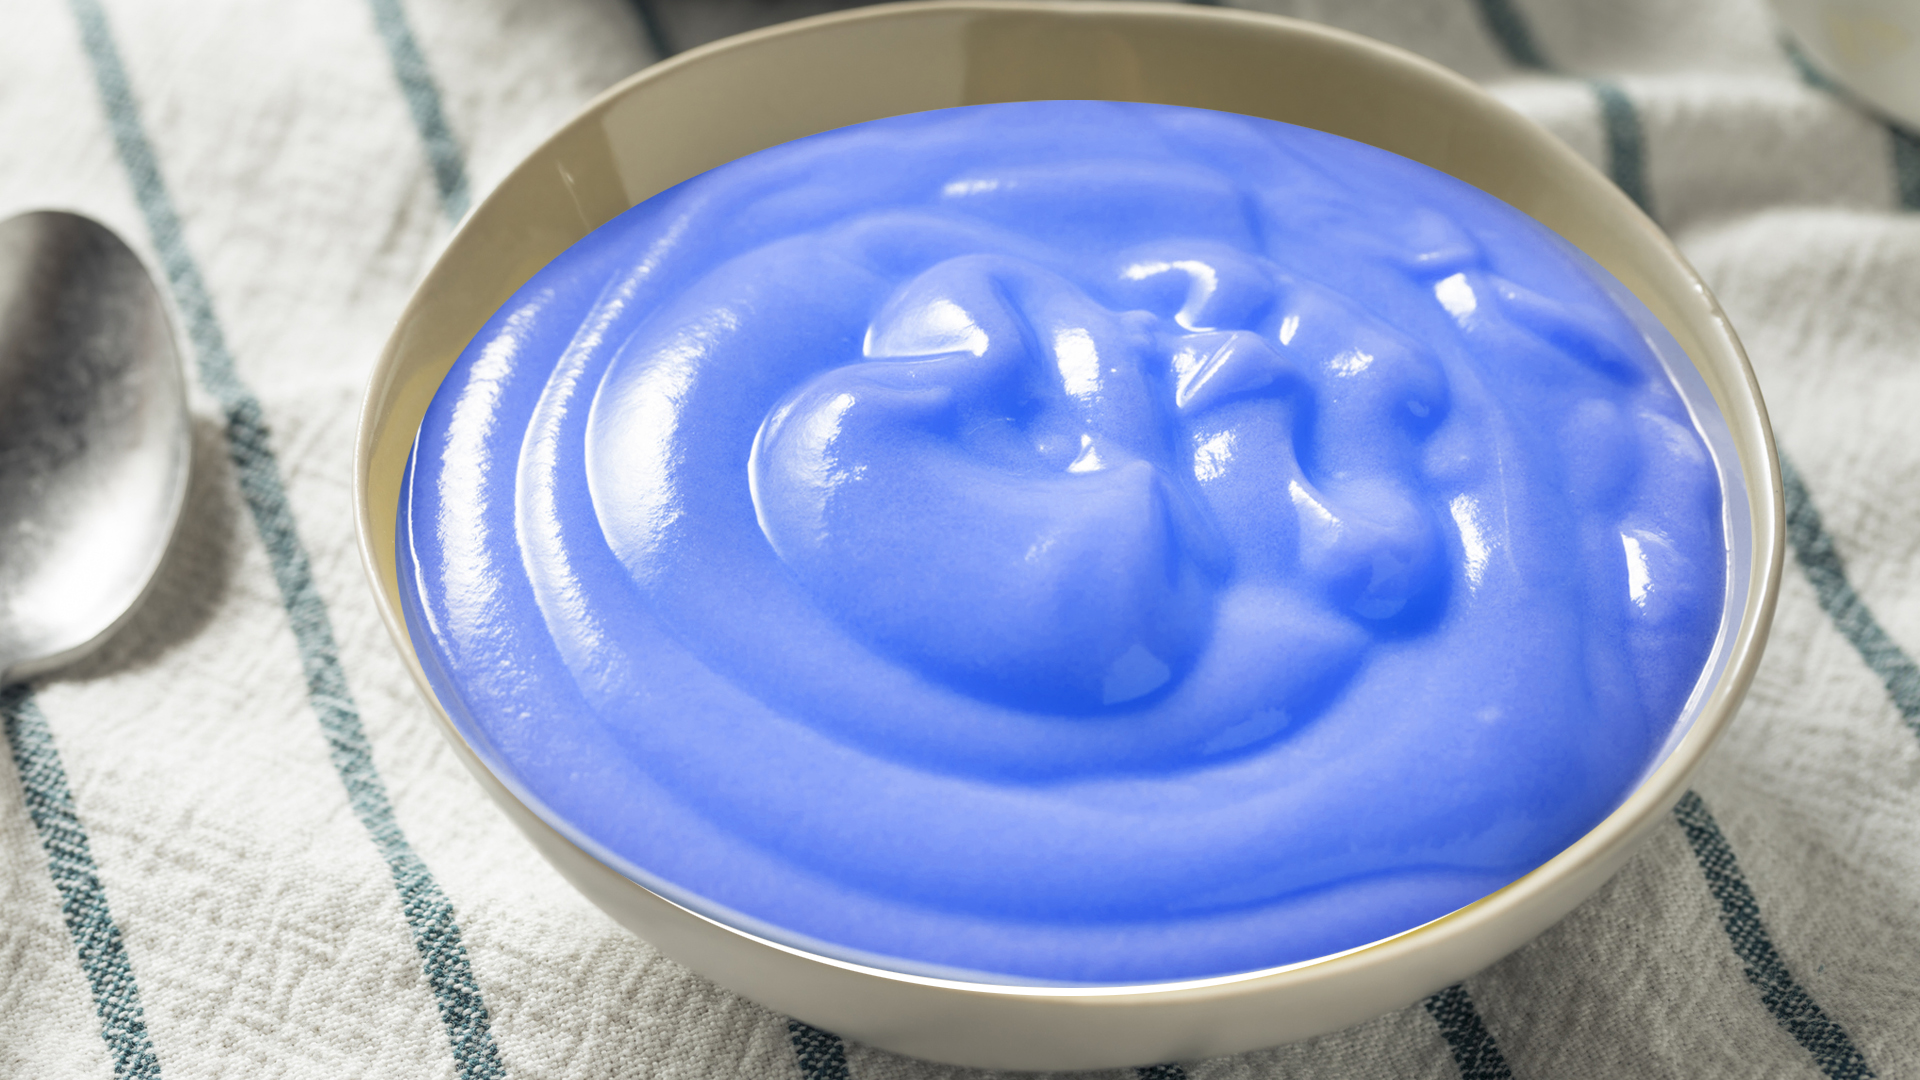 A bowl of blue slime